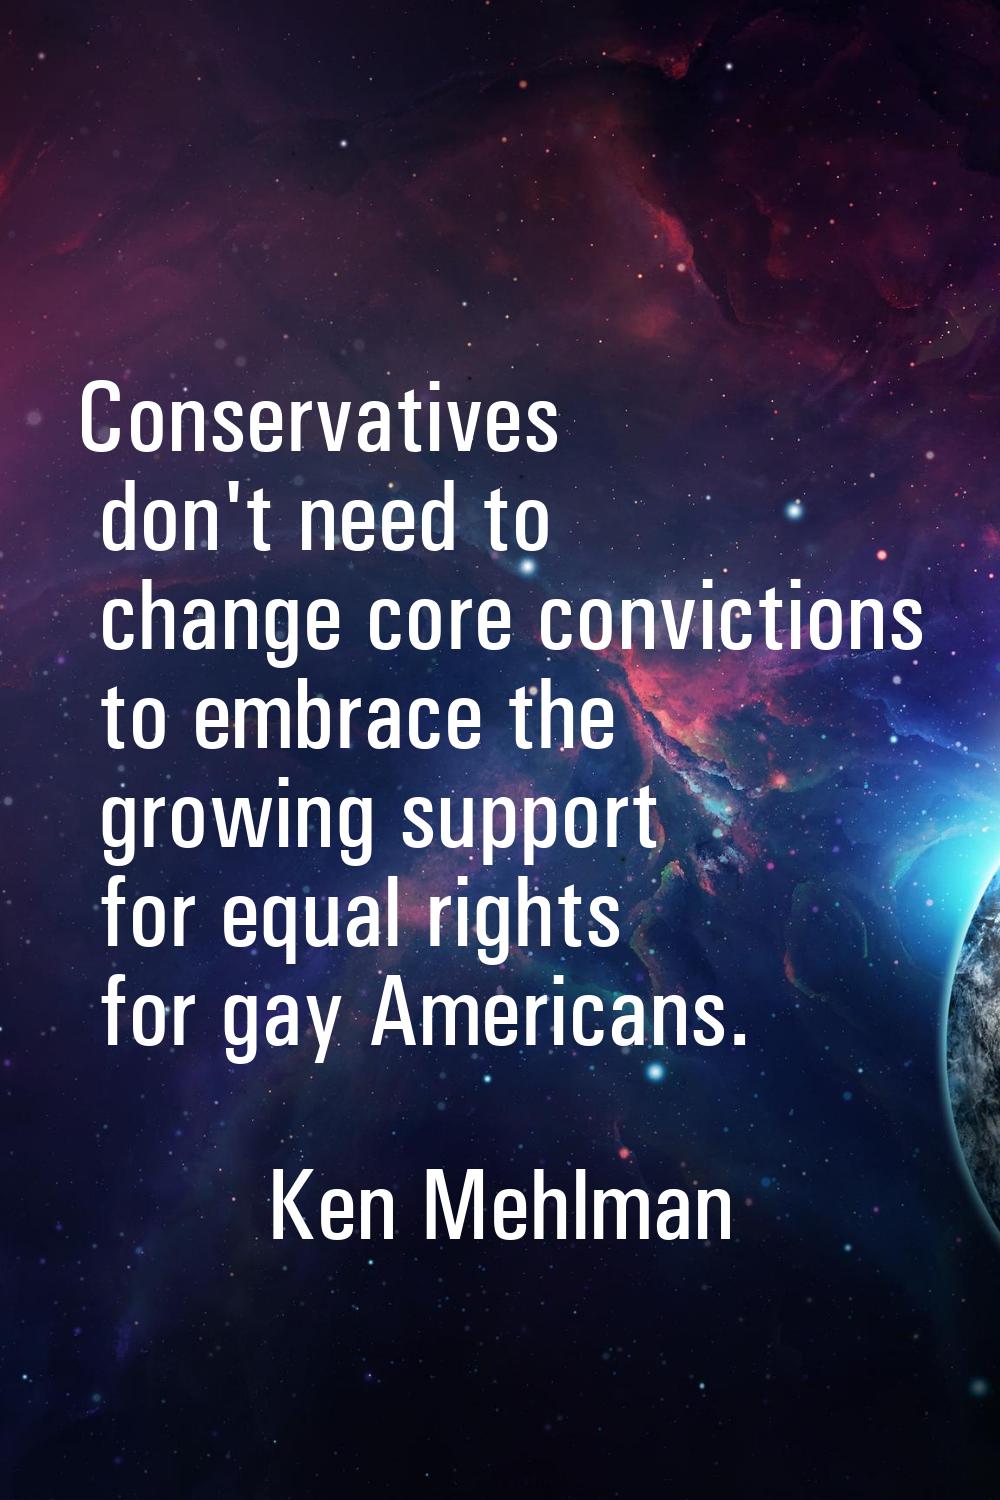 Conservatives don't need to change core convictions to embrace the growing support for equal rights